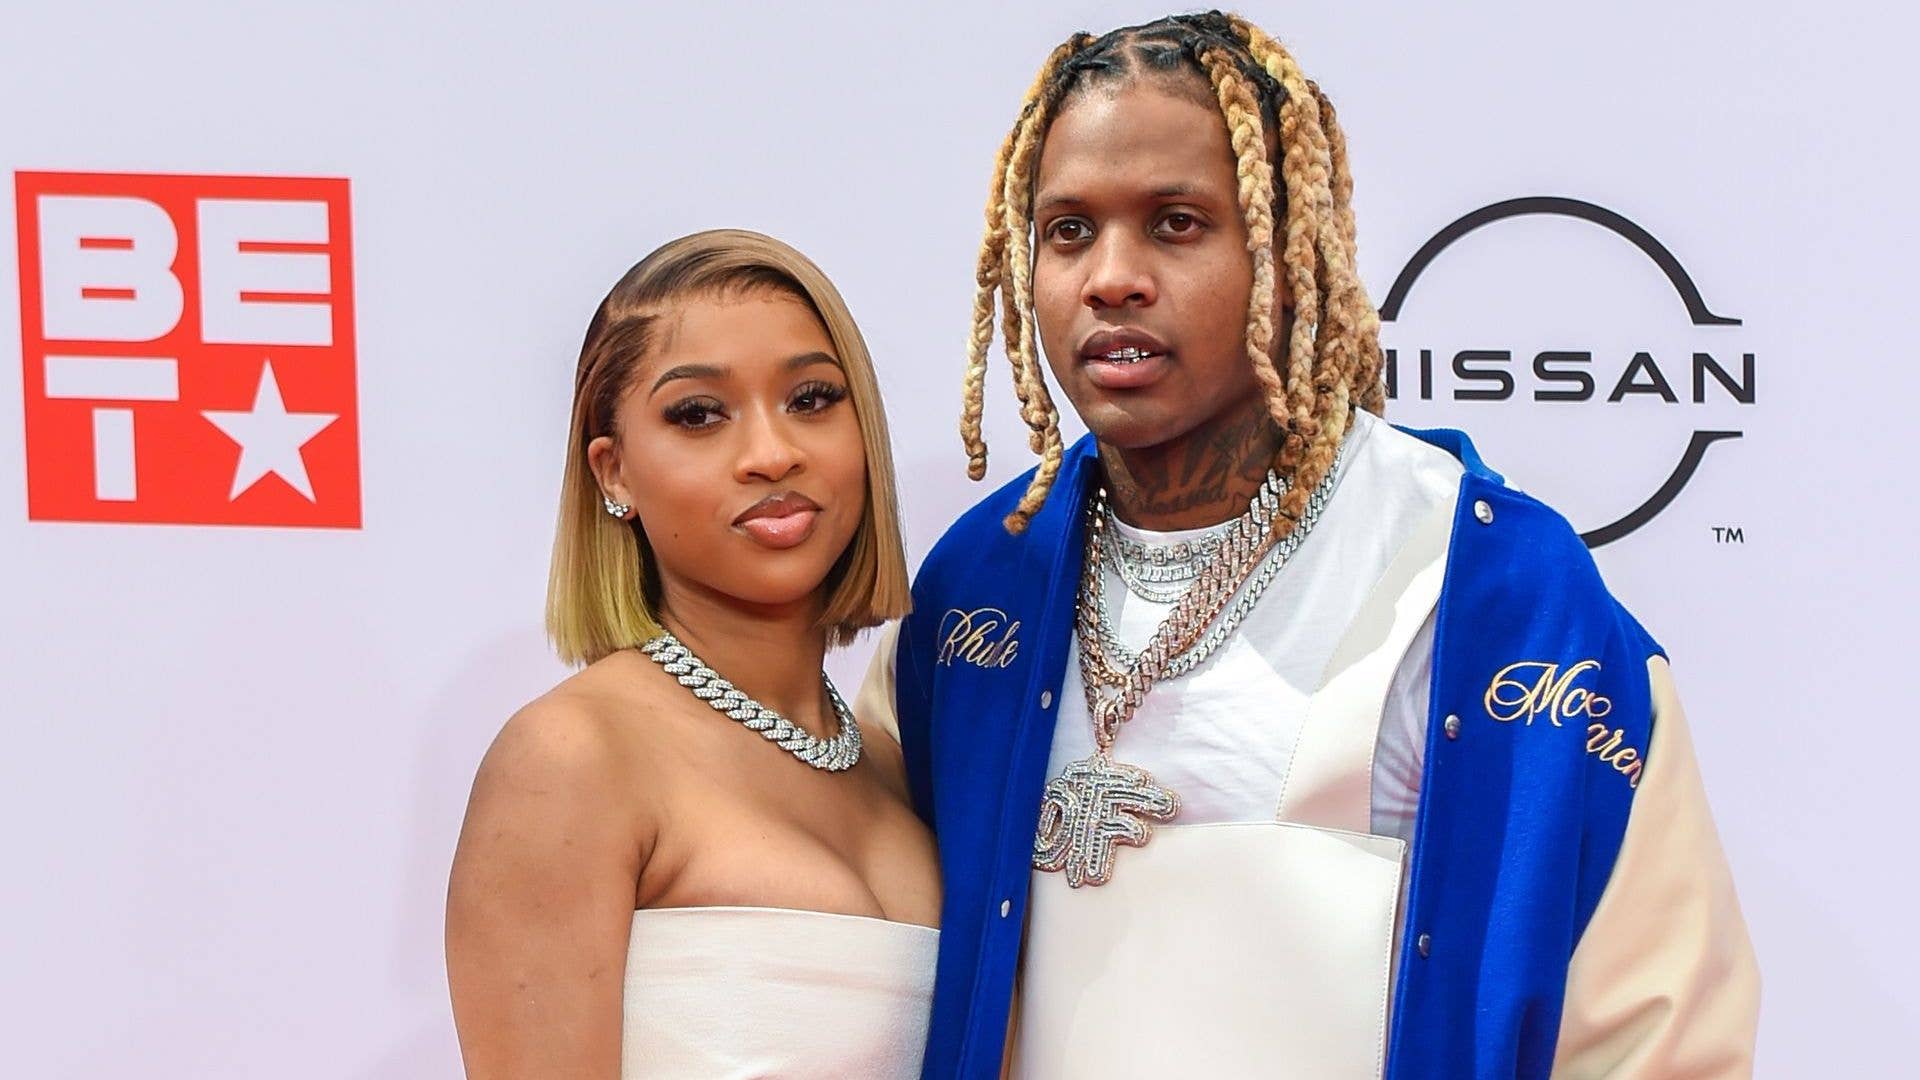 Lil Durk and India Royale attend the 2021 BET Awards